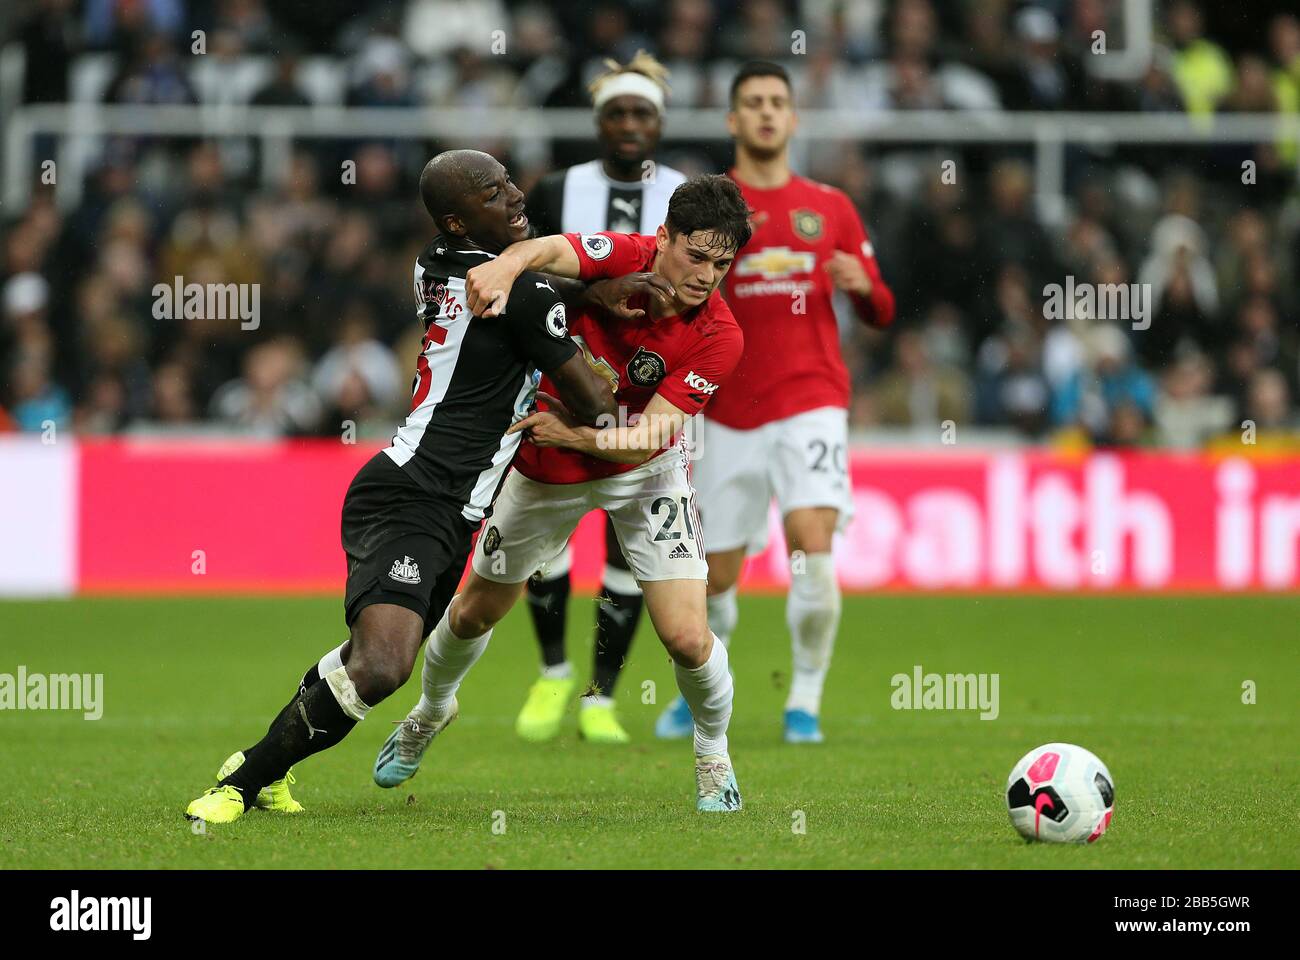 Newcastle United's Jetro Willems (left) and Manchester United's Daniel James battle for the ball Stock Photo